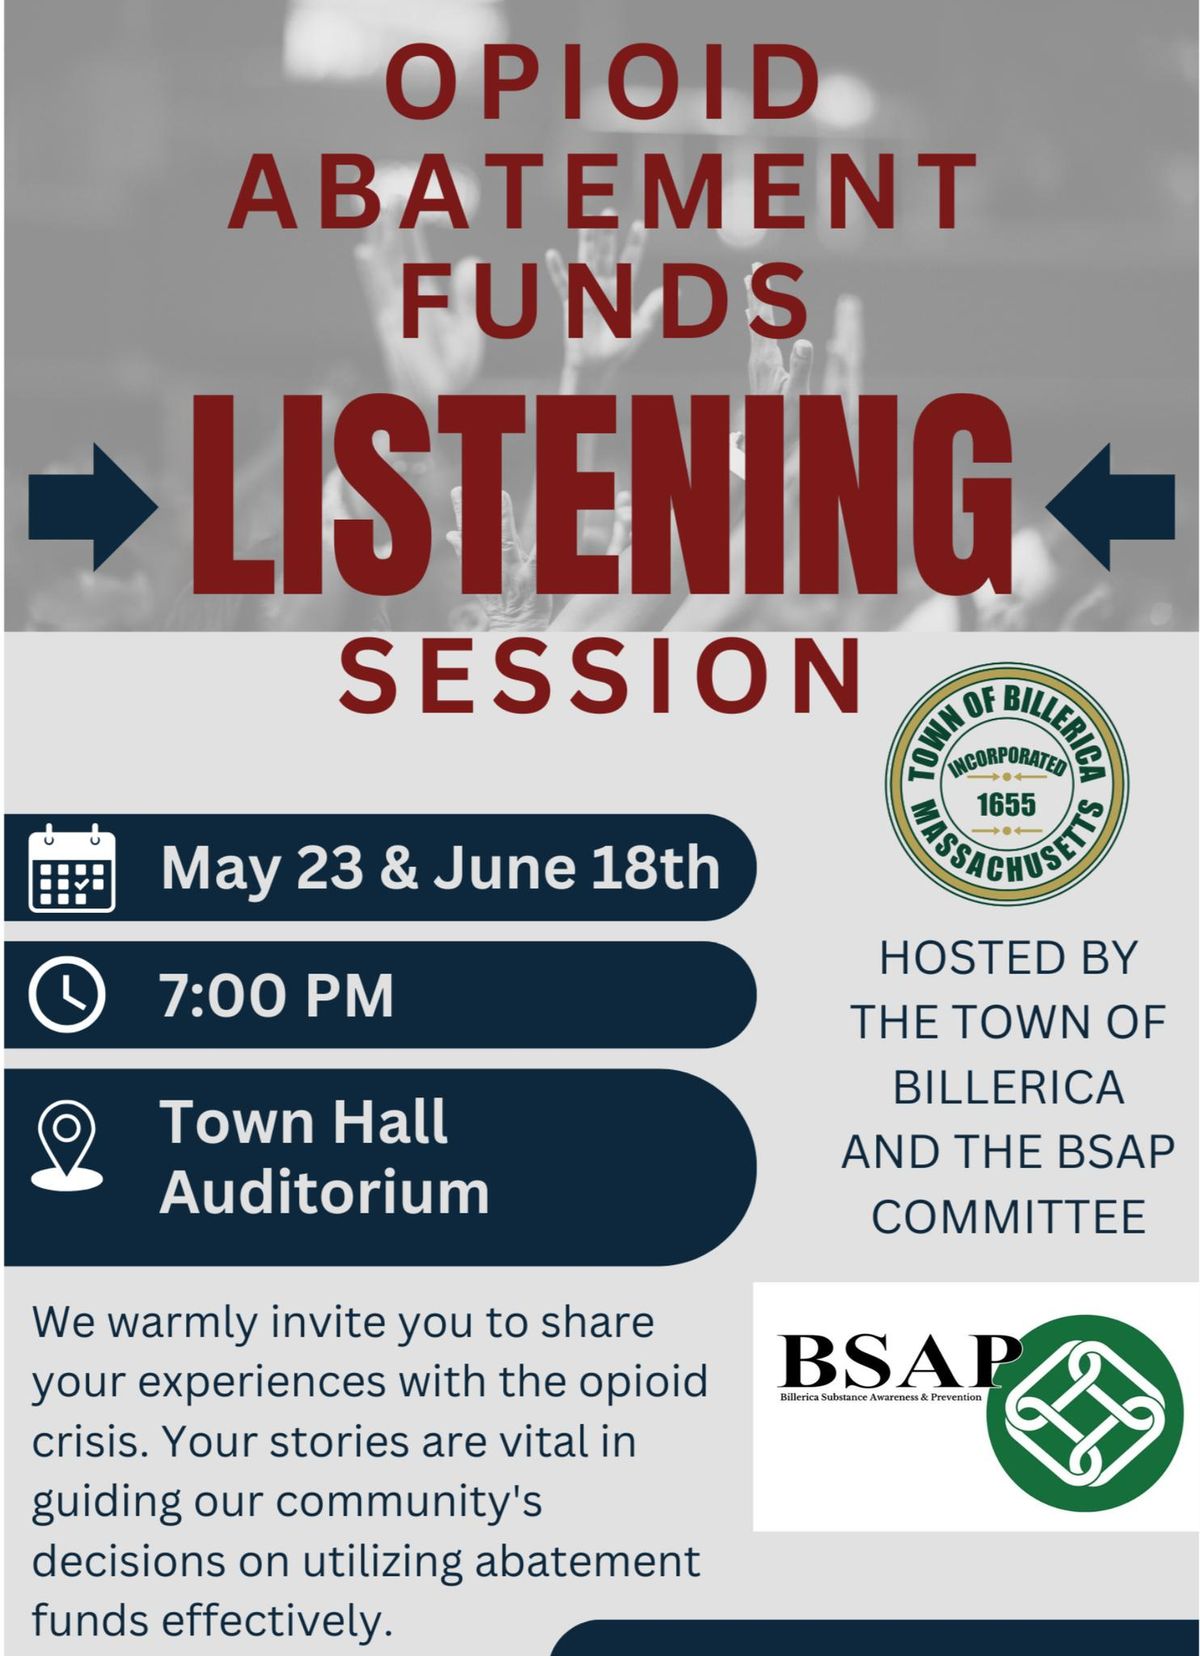 Opioid Abatement Funds Listening Session 